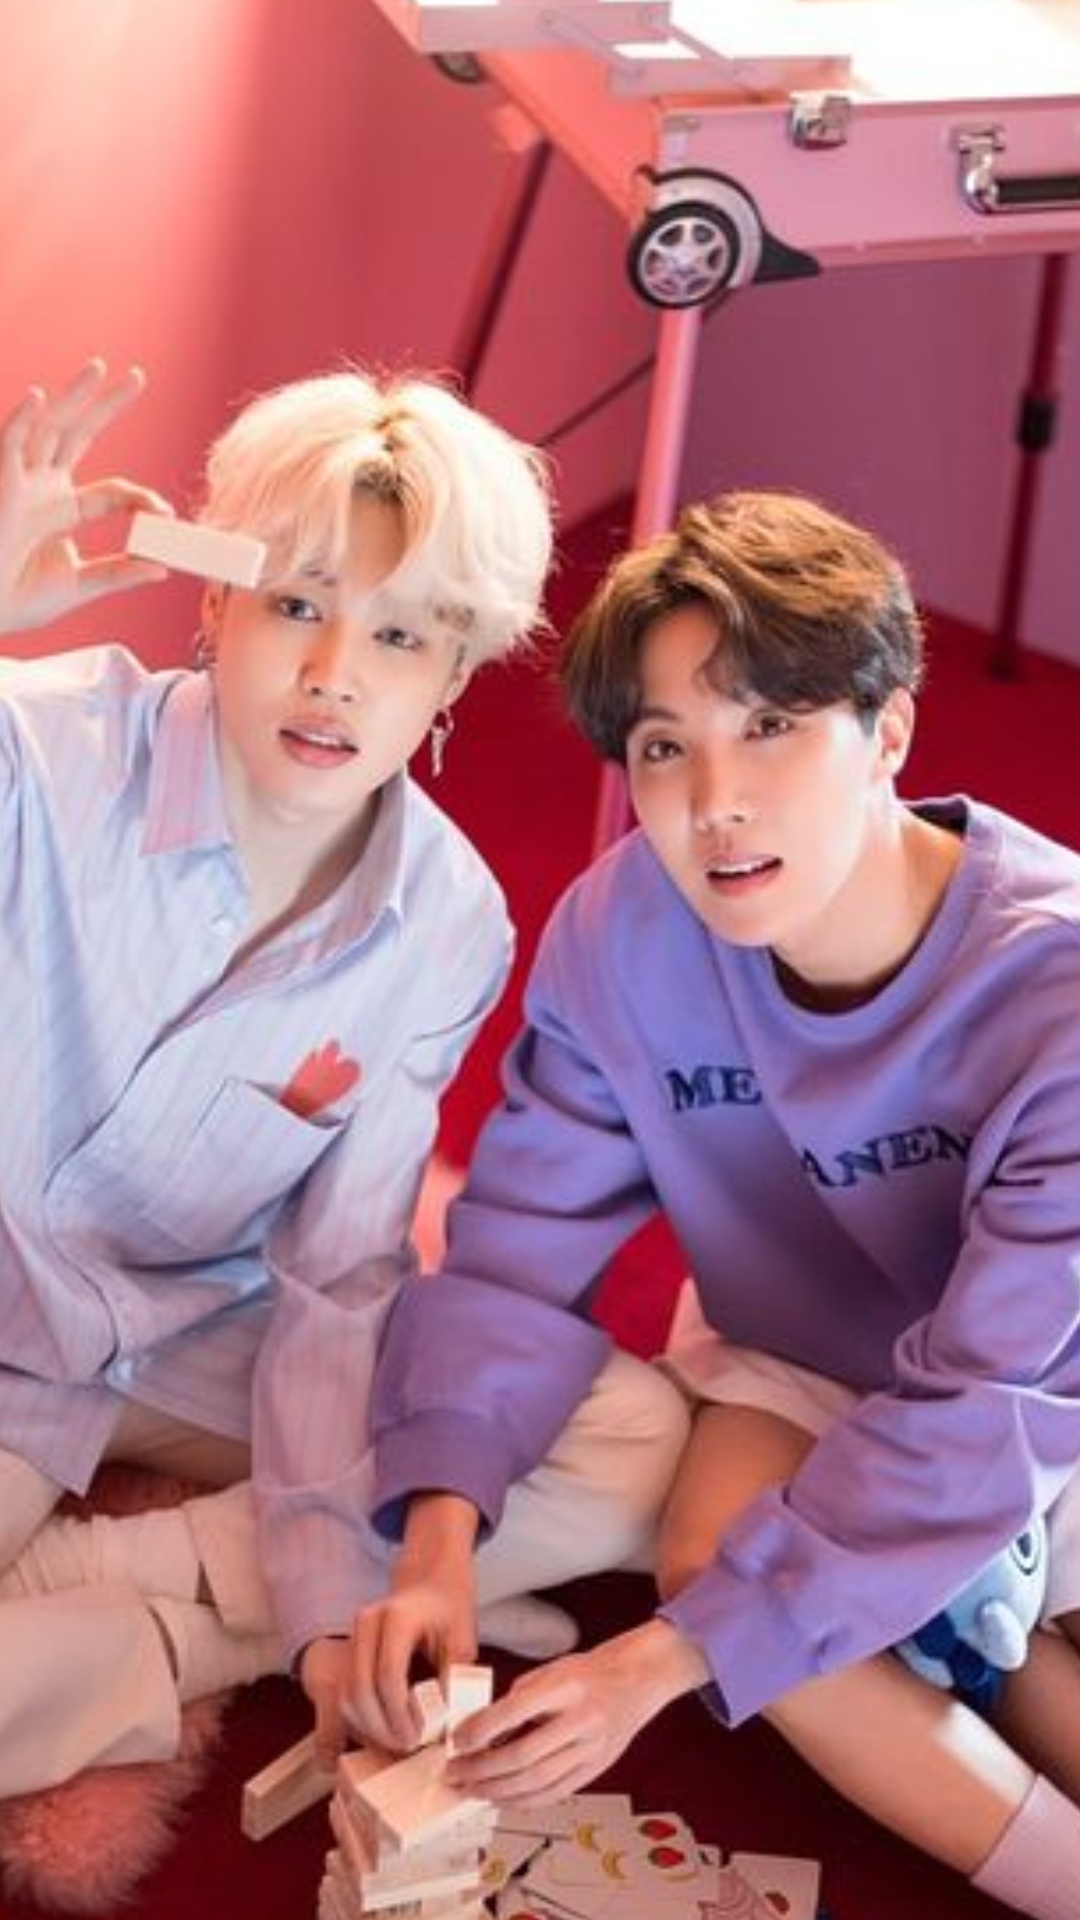 BTS Jimin and Jhope make the cutest Kpop duo and these photos are proof